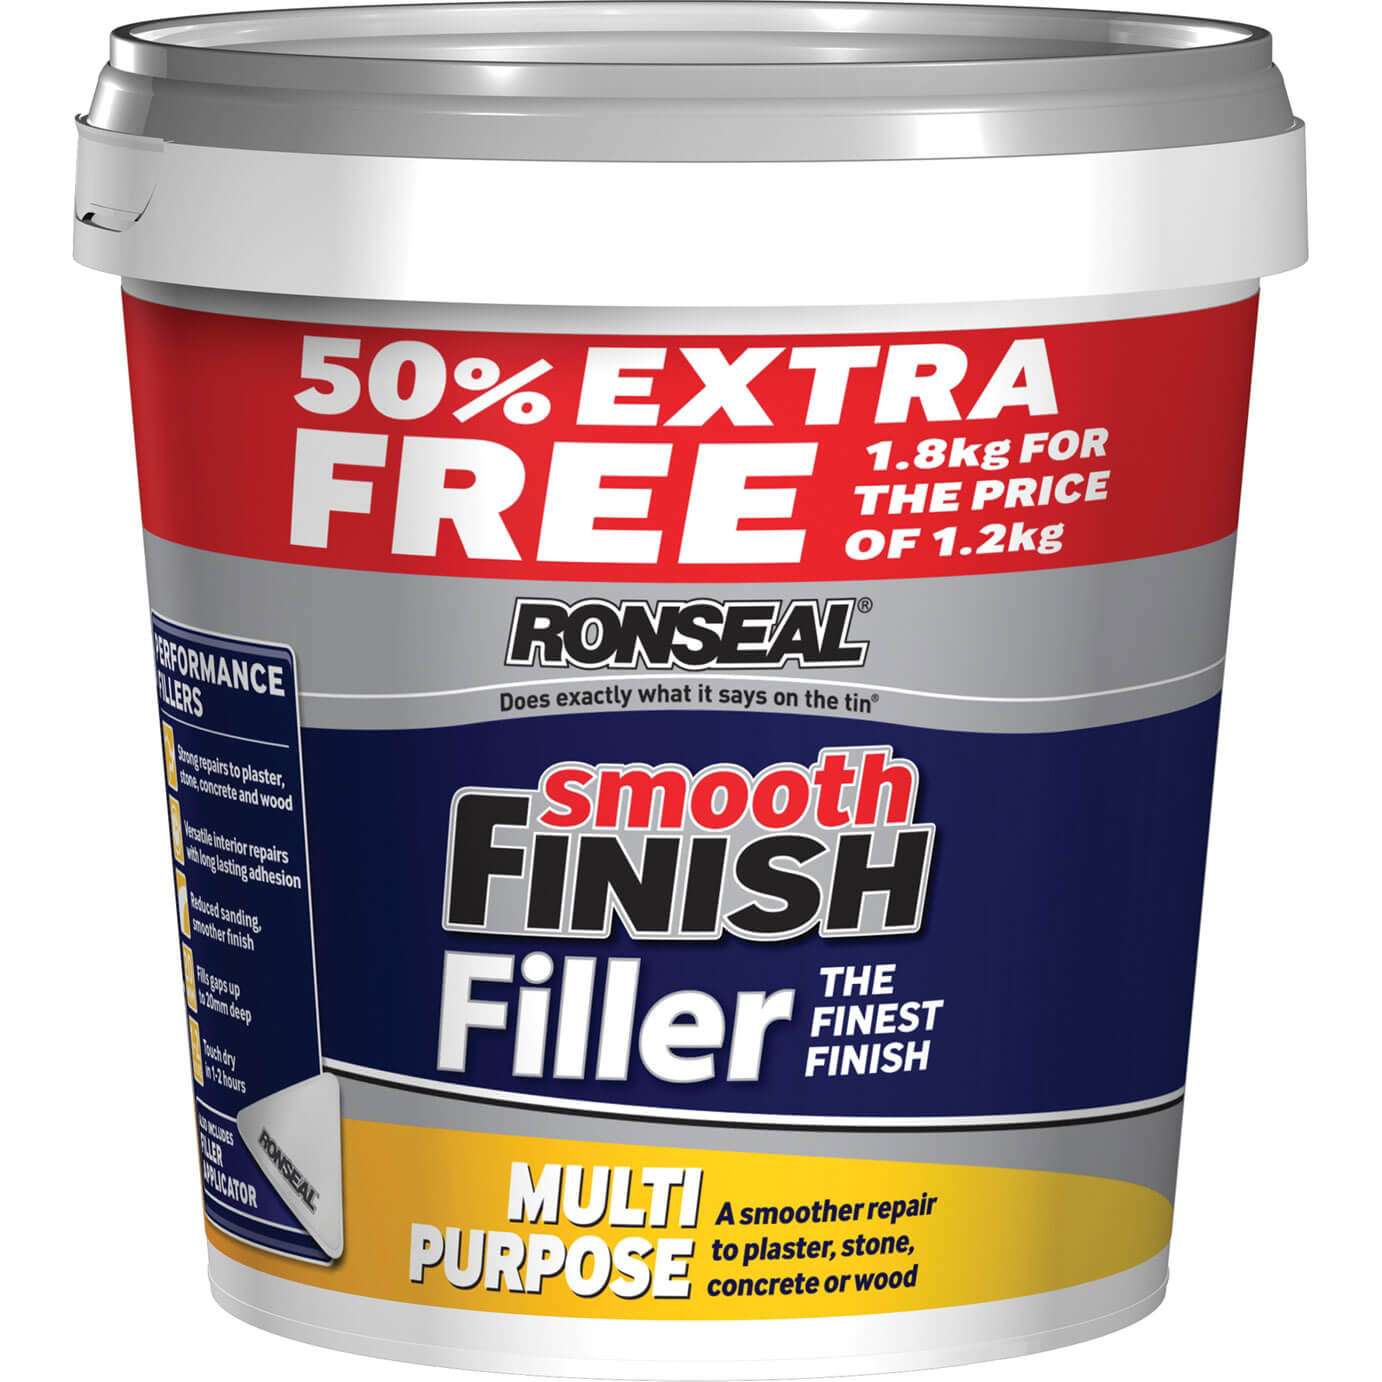 Image of Ronseal Smooth Finish Multi Purpose Interior Wall Ready Mix Filler 1.8kg